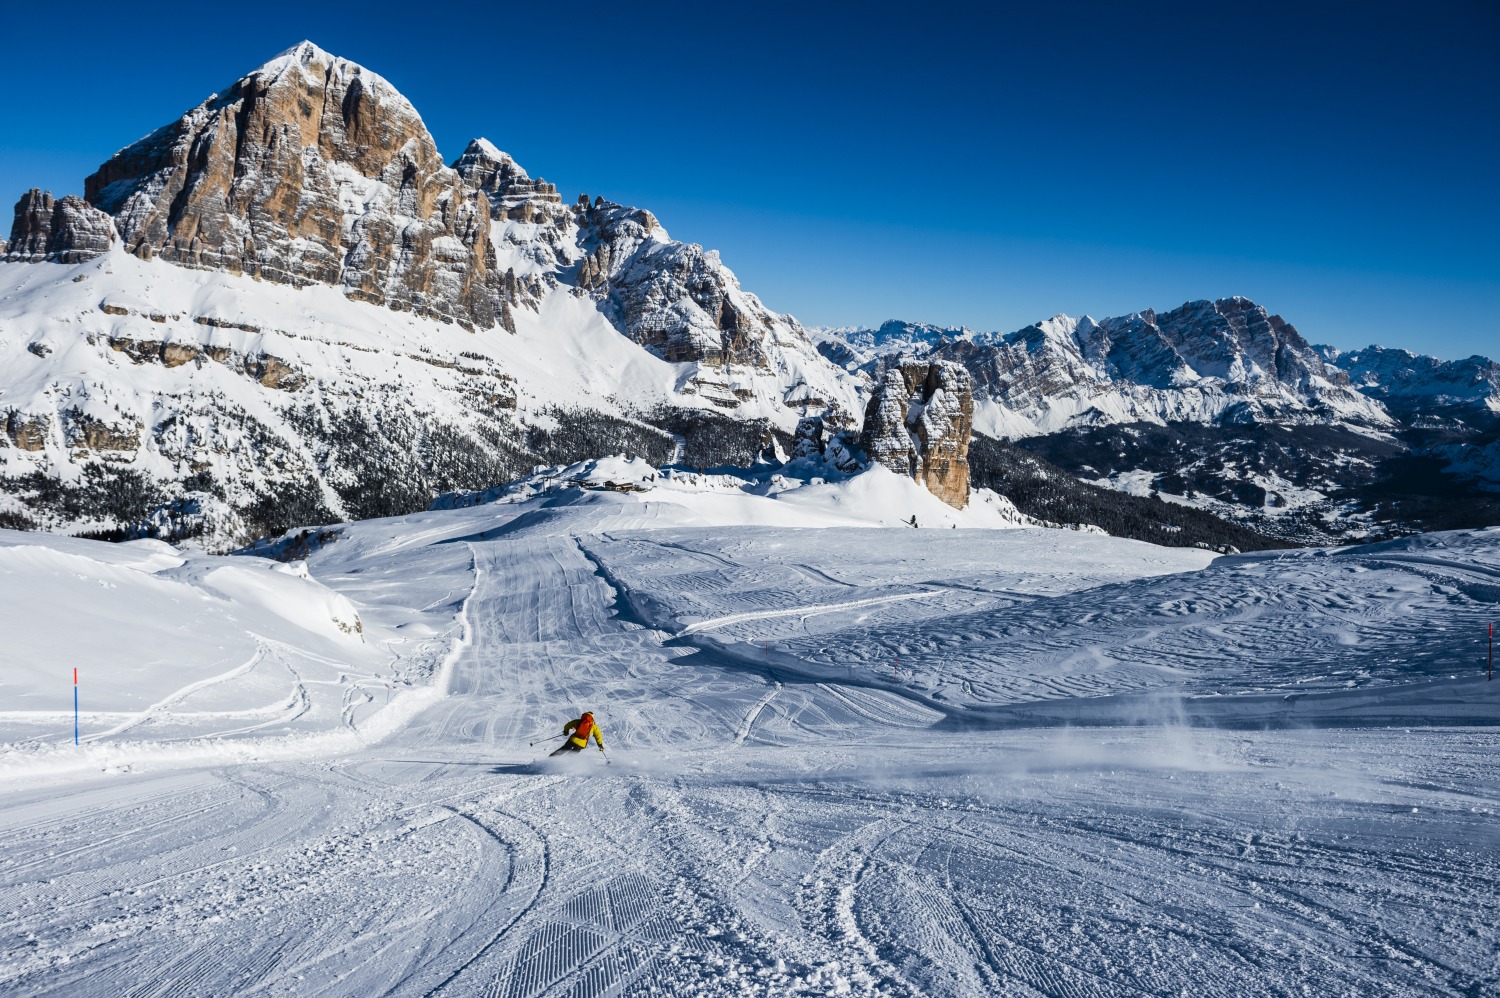 Off-piste skiing: the best places to learn